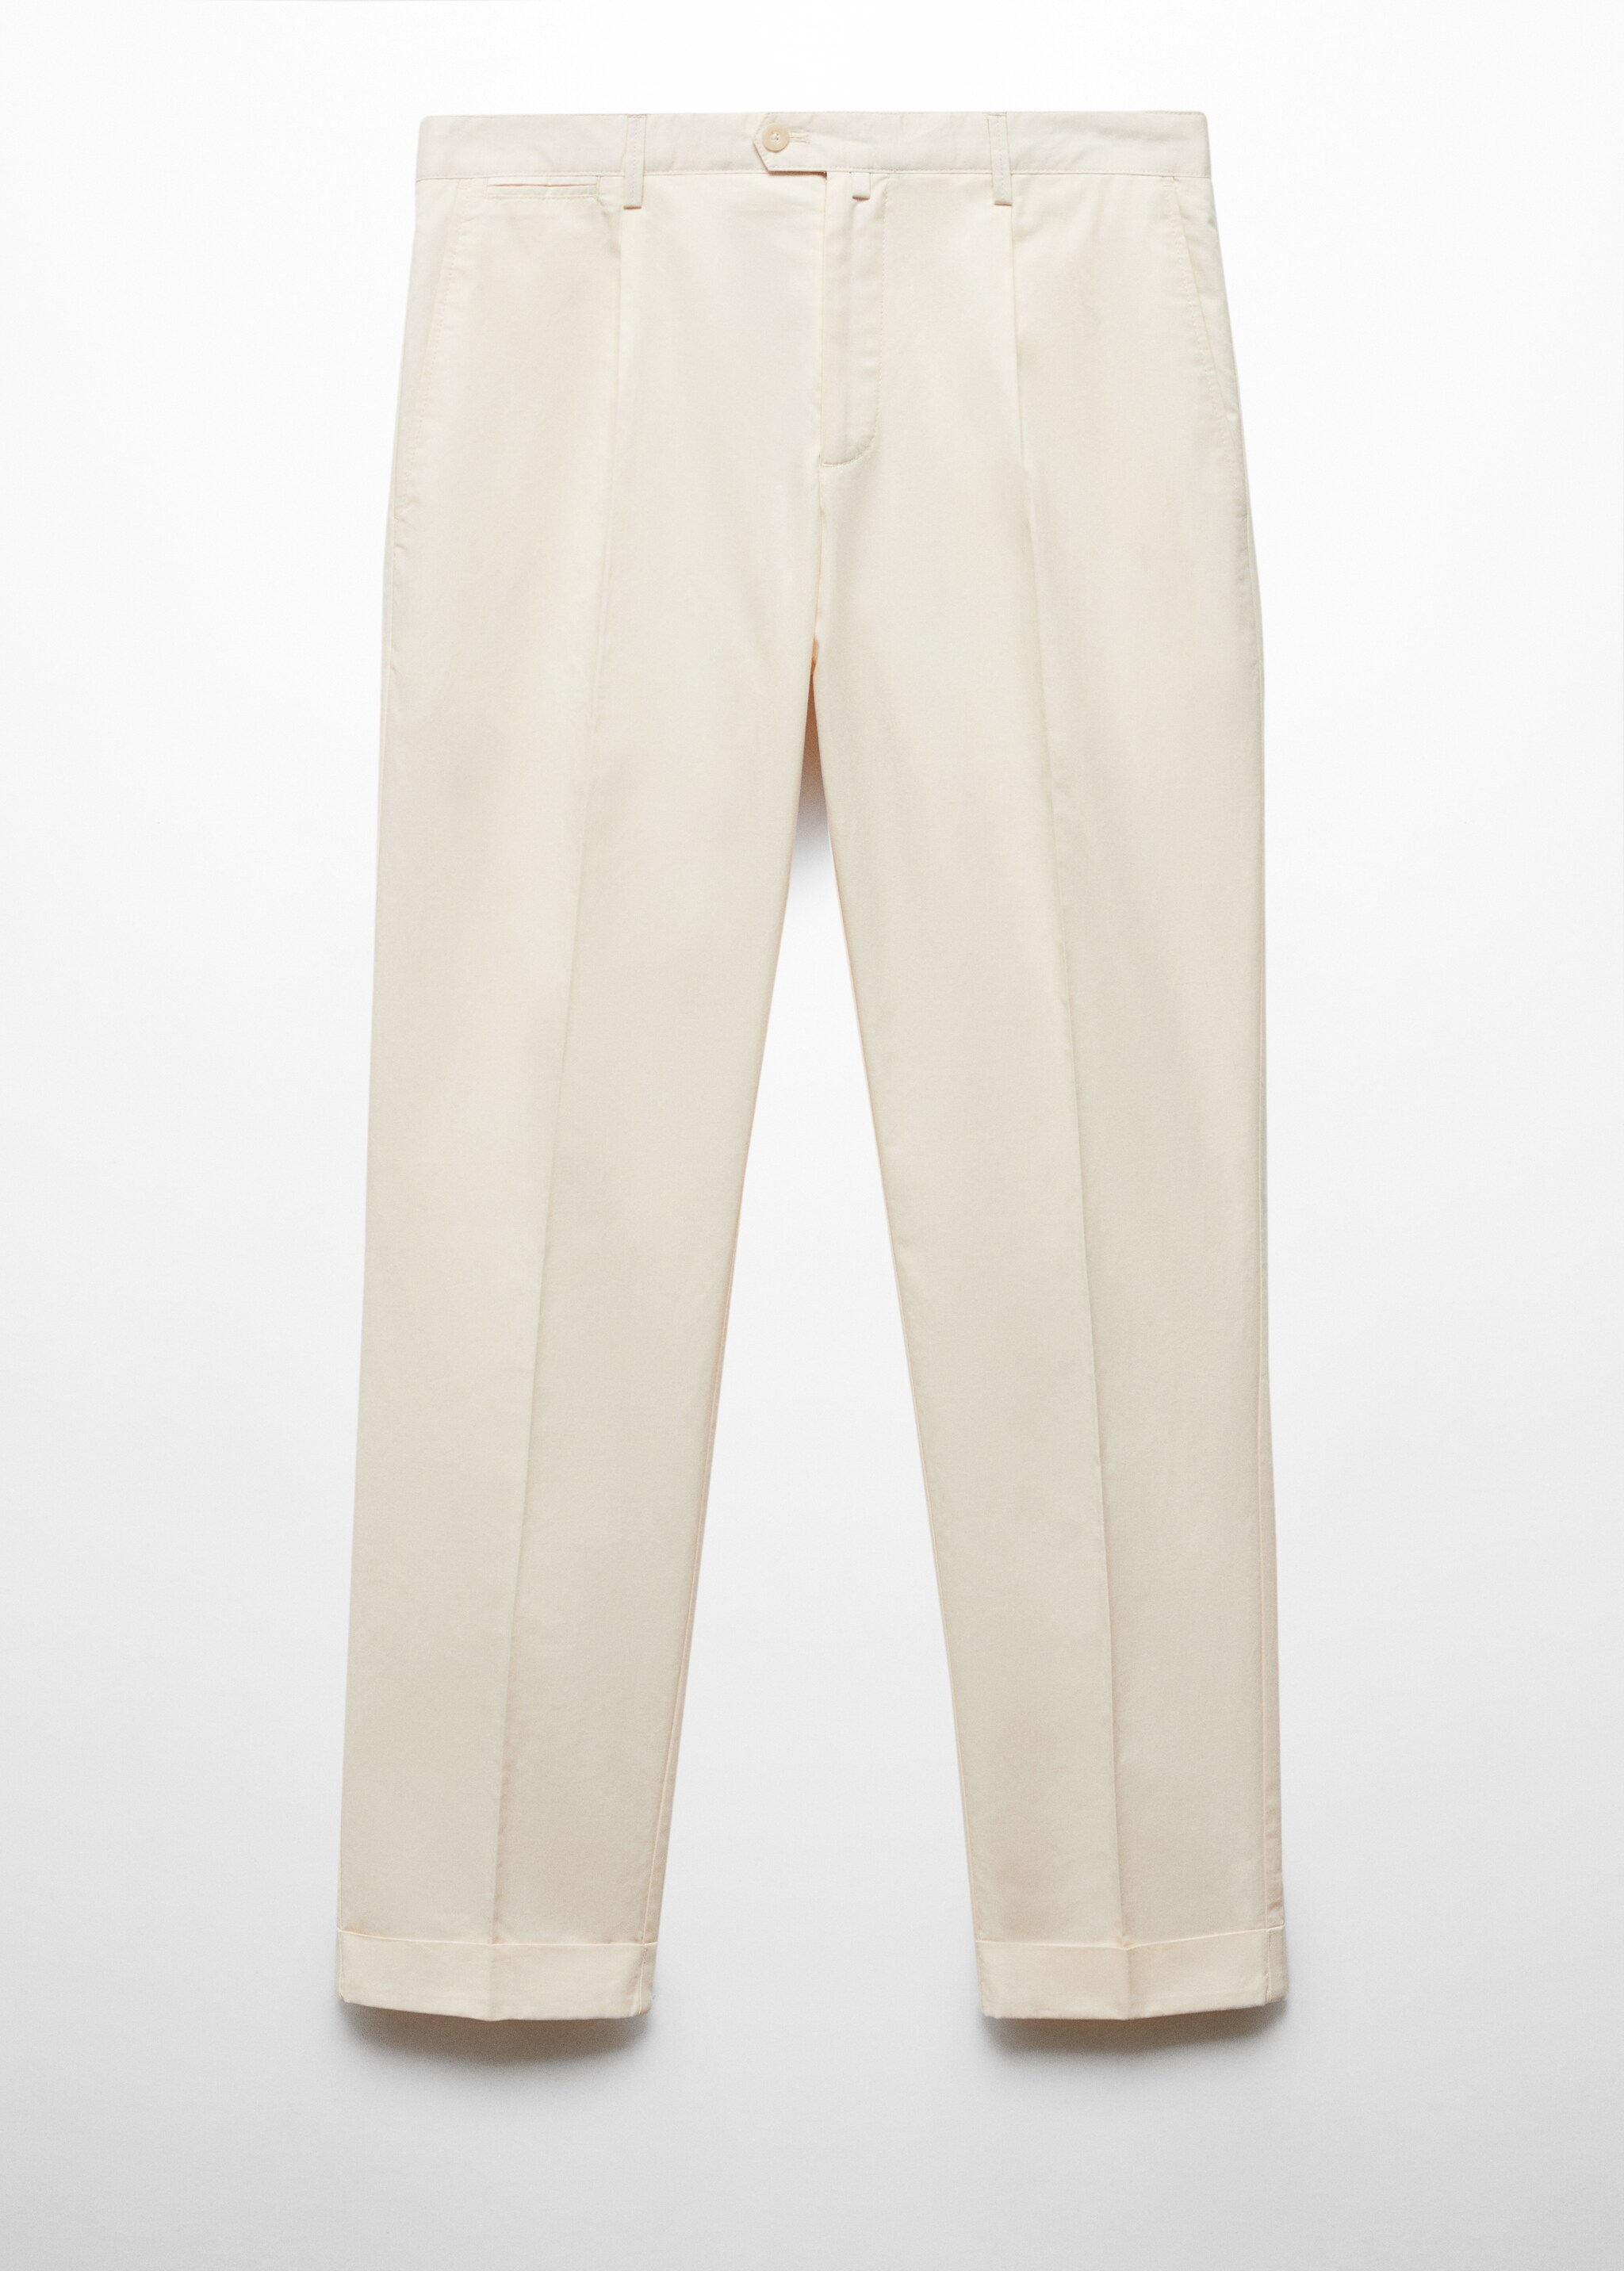 Cotton linen pants with darts - Article without model